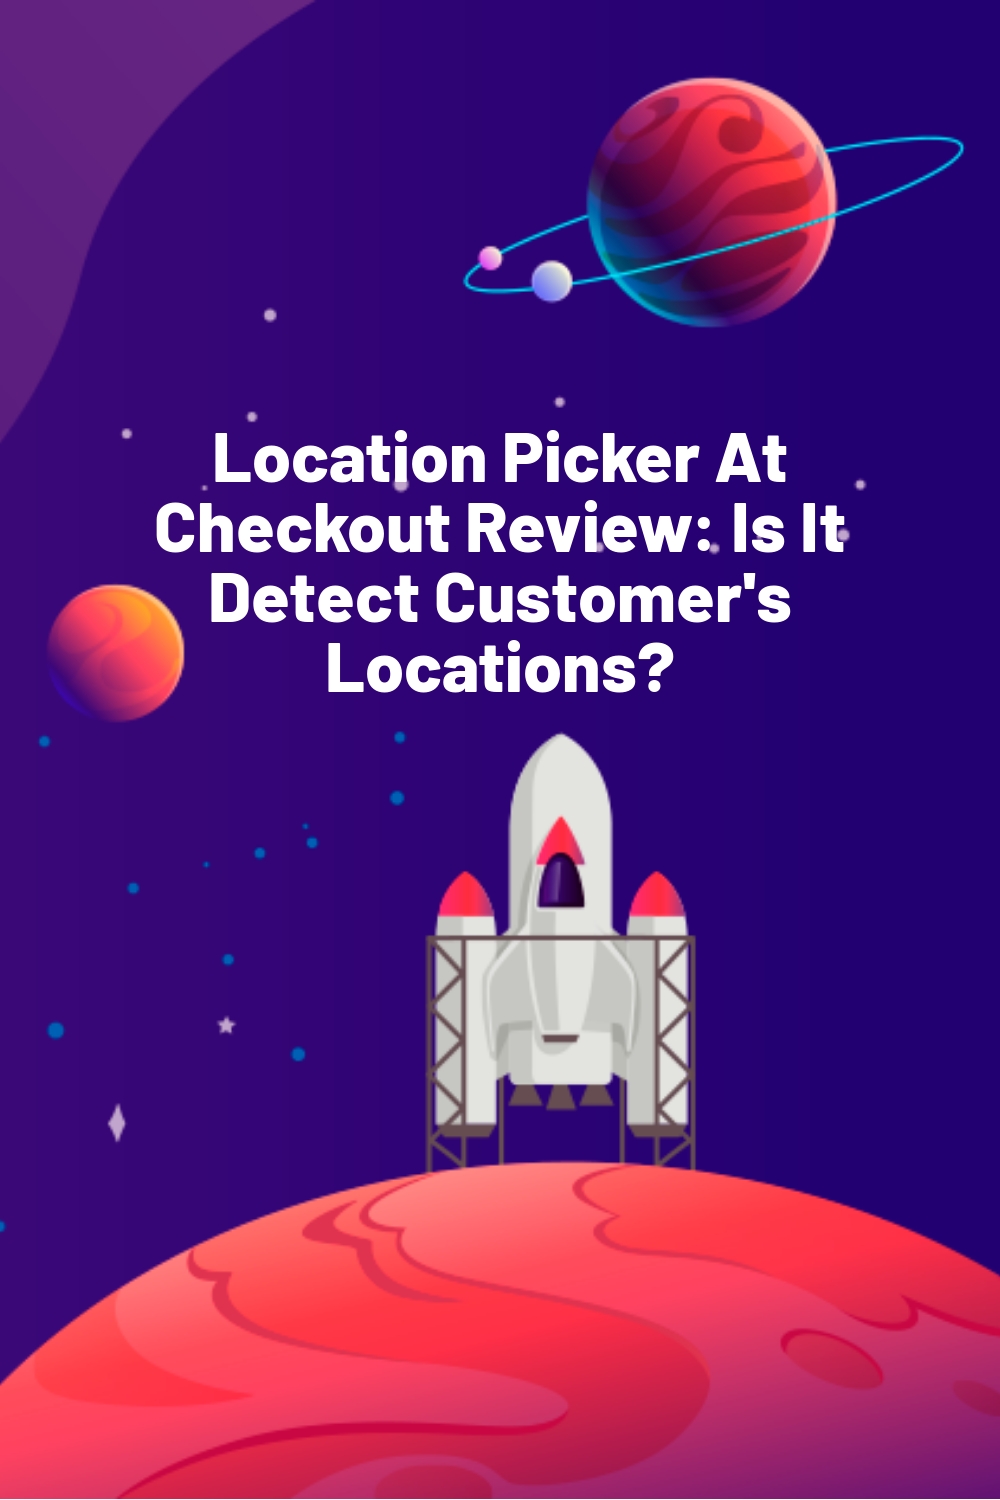 Location Picker At Checkout Review: Is It Detect Customer’s Locations?